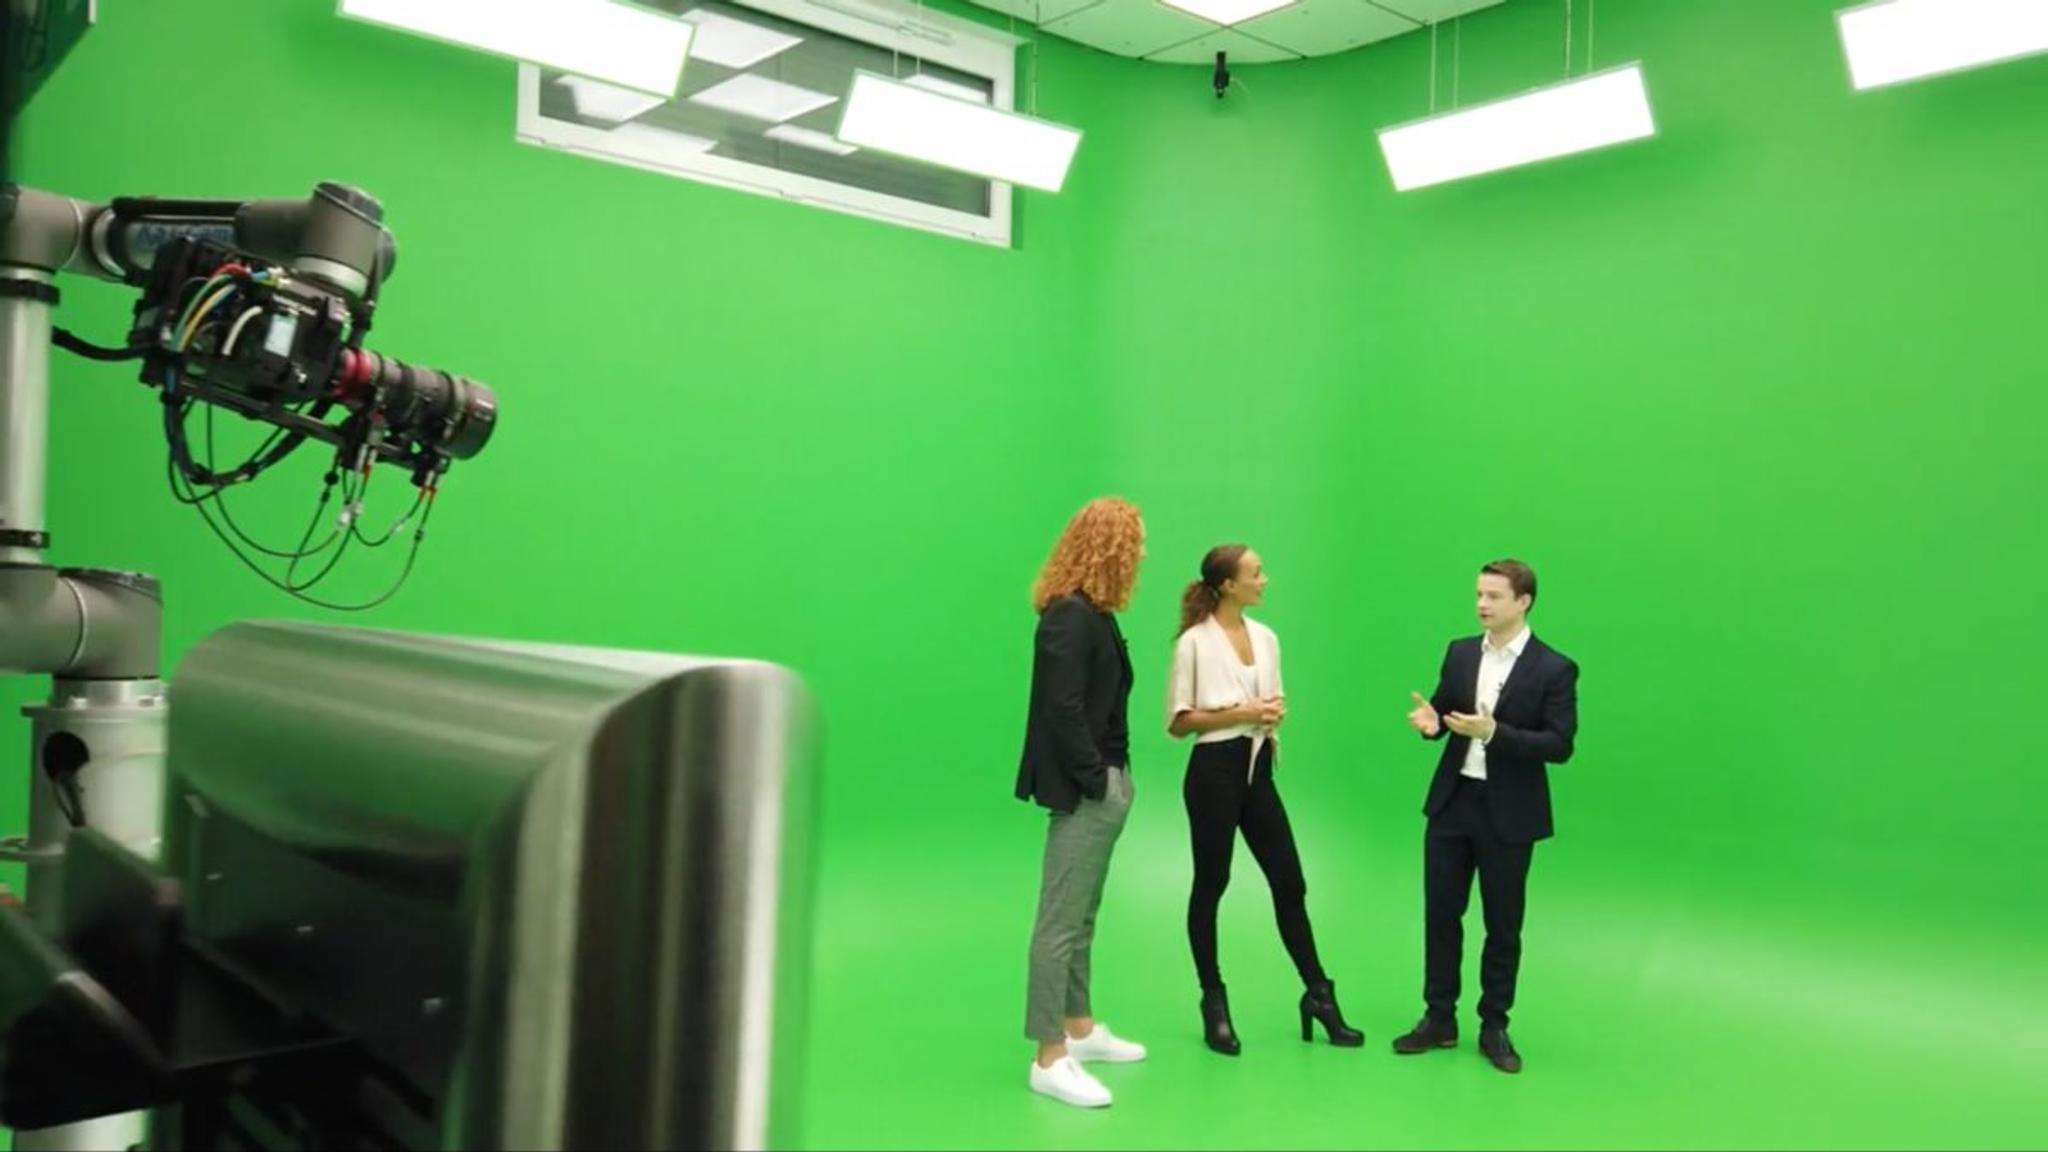 3 people stand on a greenscreen. A camera is pointing at them on a mechanical arm.